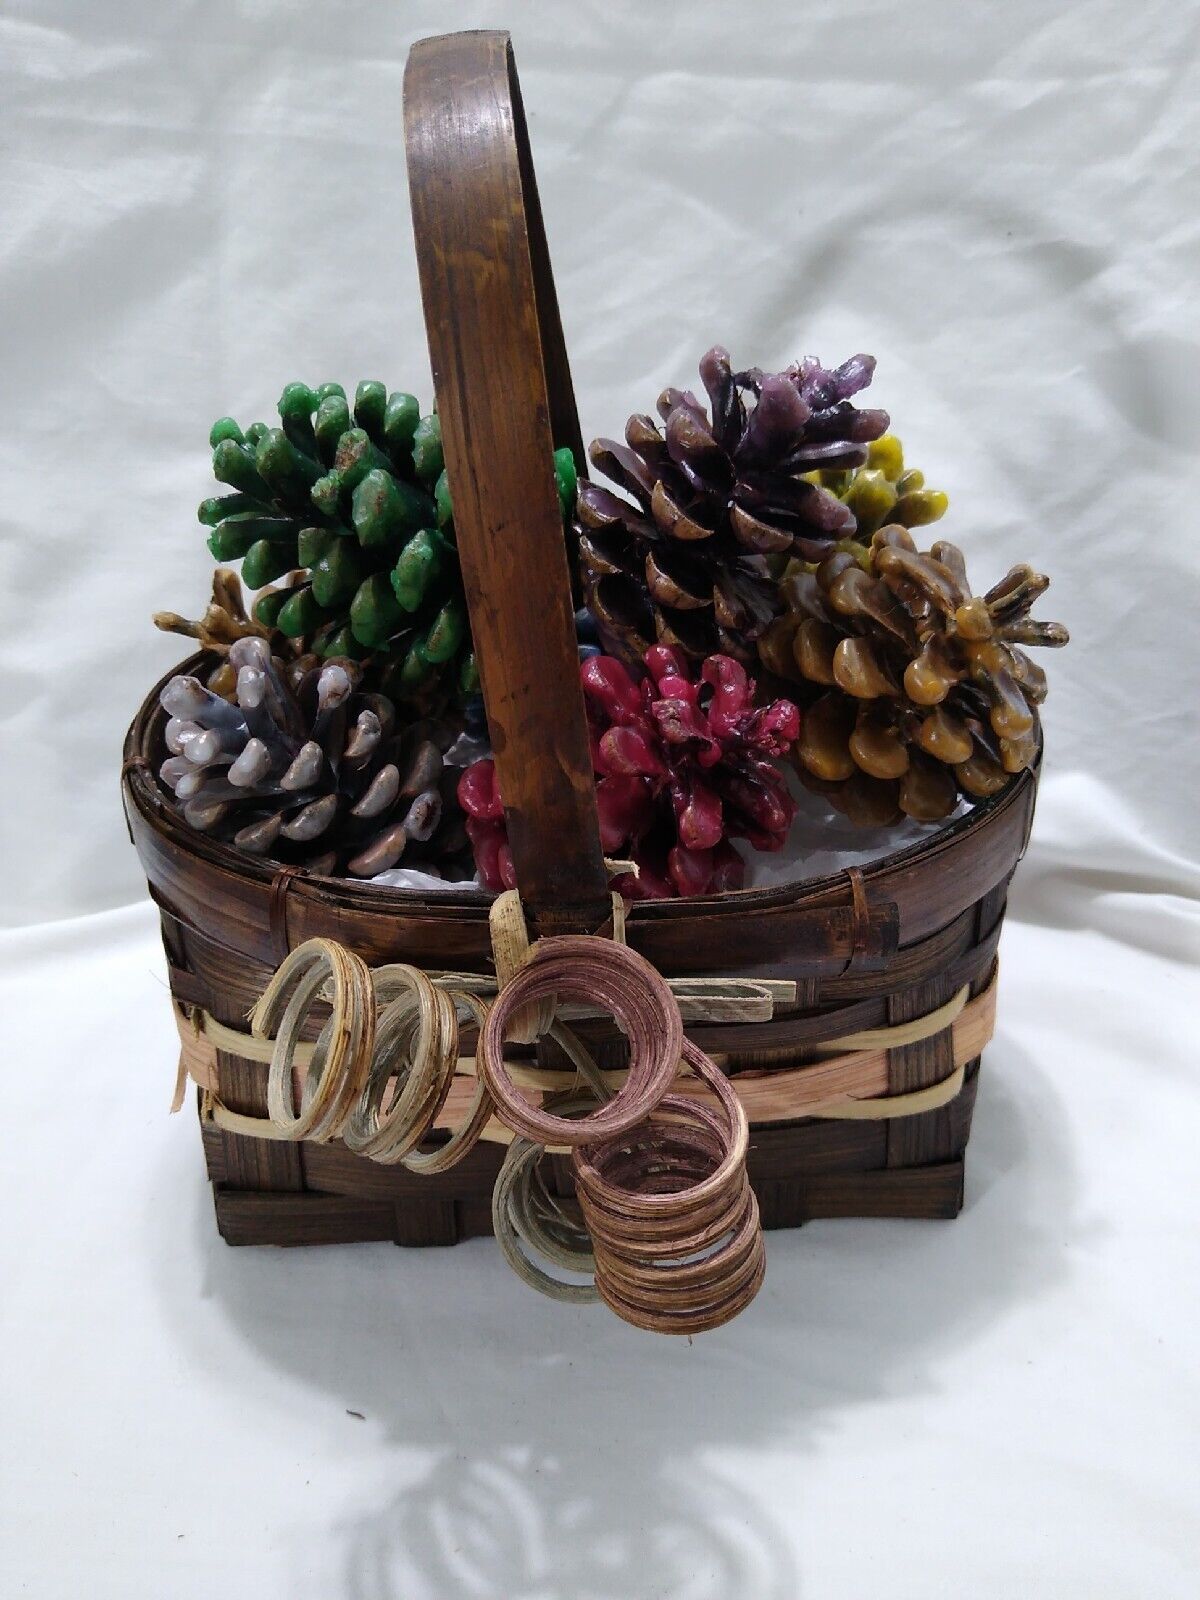 Waxed Pine Cone in a Basket Fire Starters (Fireplace) or Fall Decorations